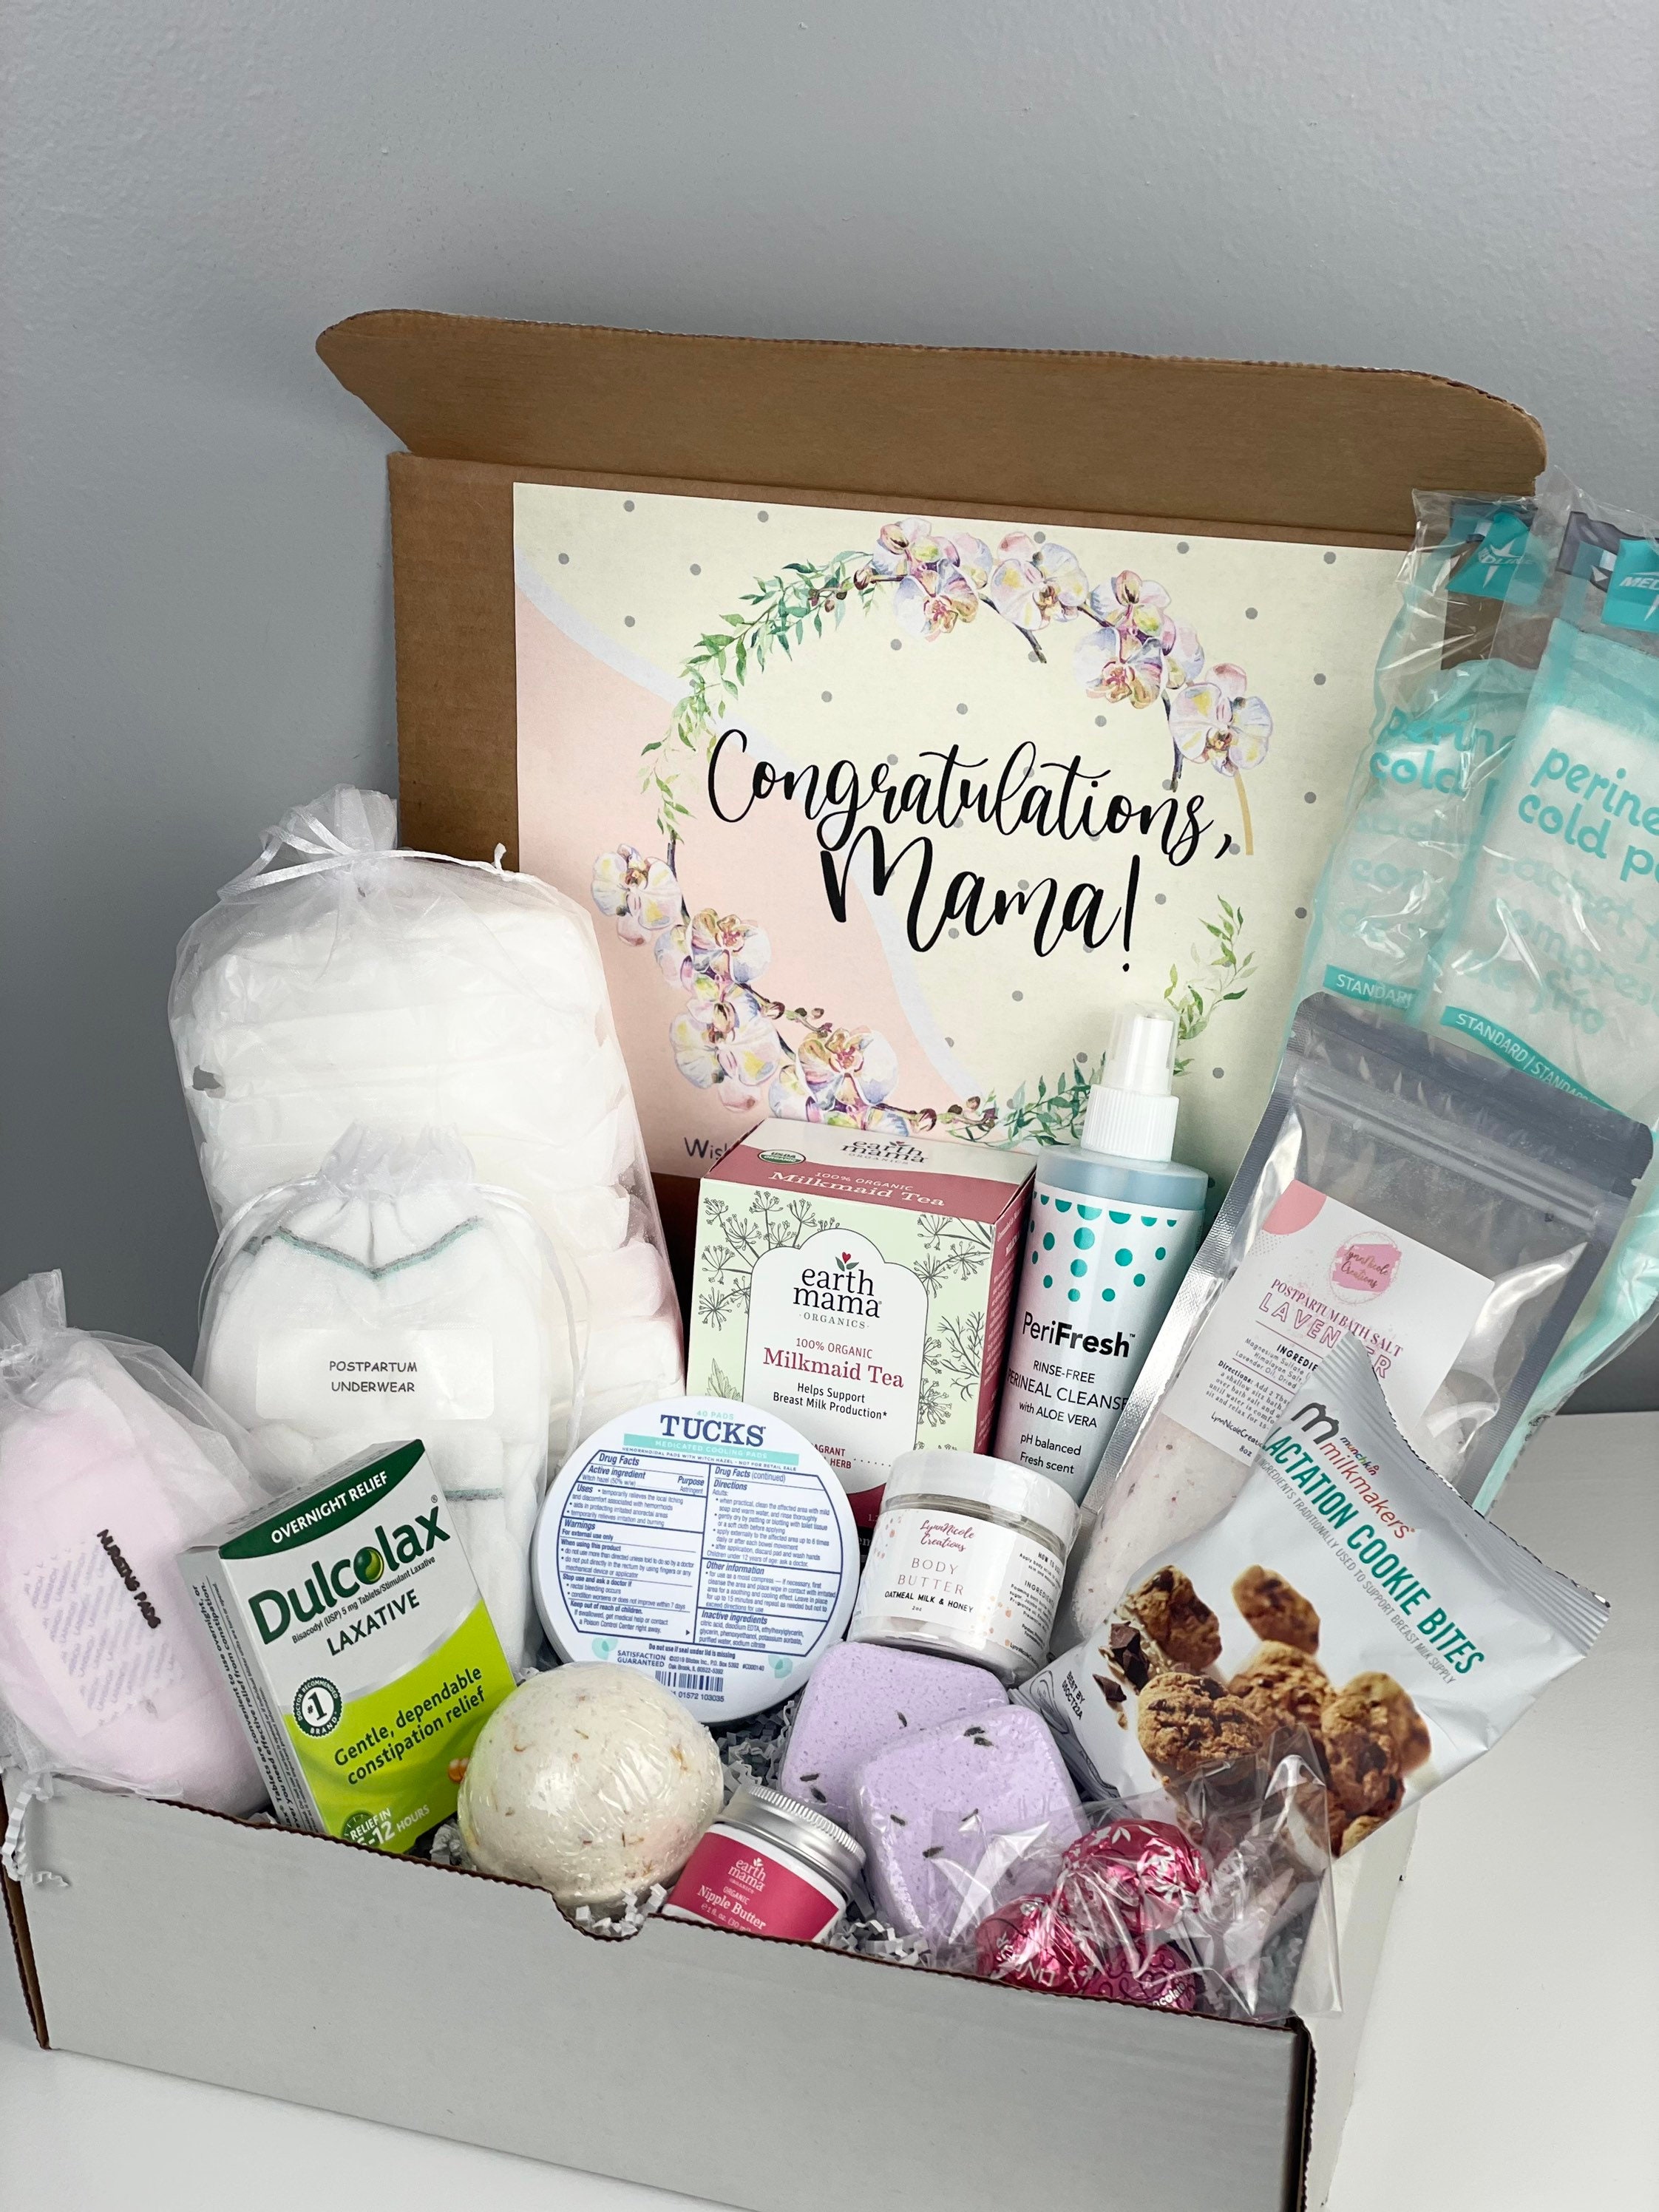 Best First Time Mom Pregnancy Gifts in 2022: From Morning Sickness Remedies  to Postpartum Recovery Kits